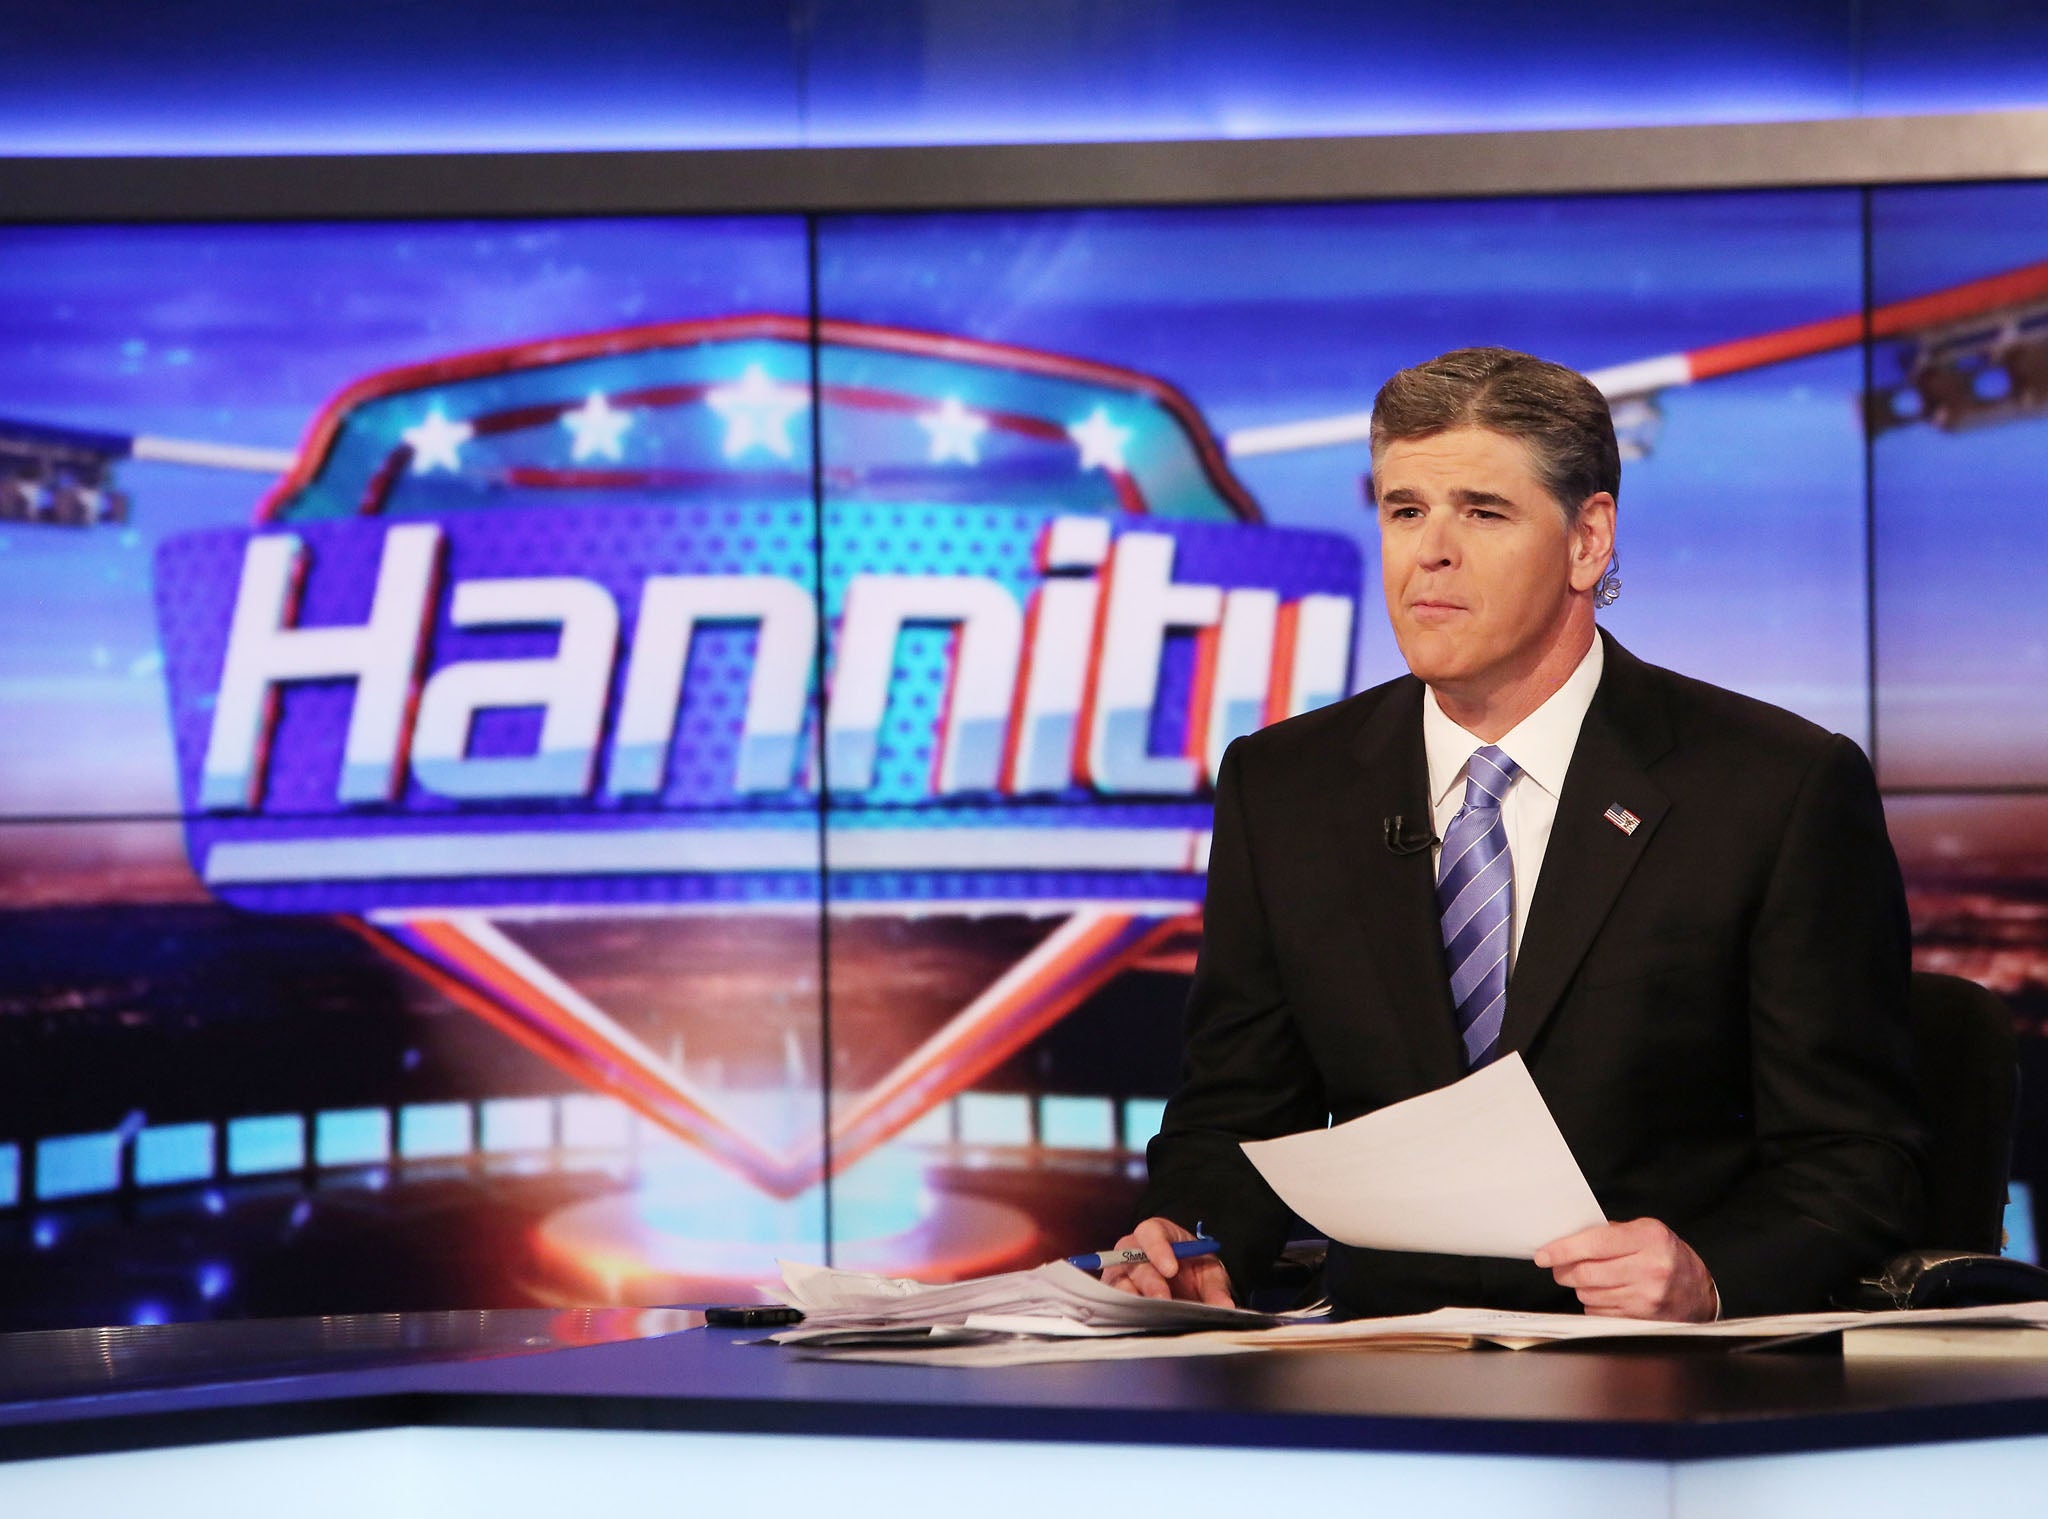 Fox News host Sean Hannity was criticised for his opinionated political coverage by veteran journalist Ted Koppel.